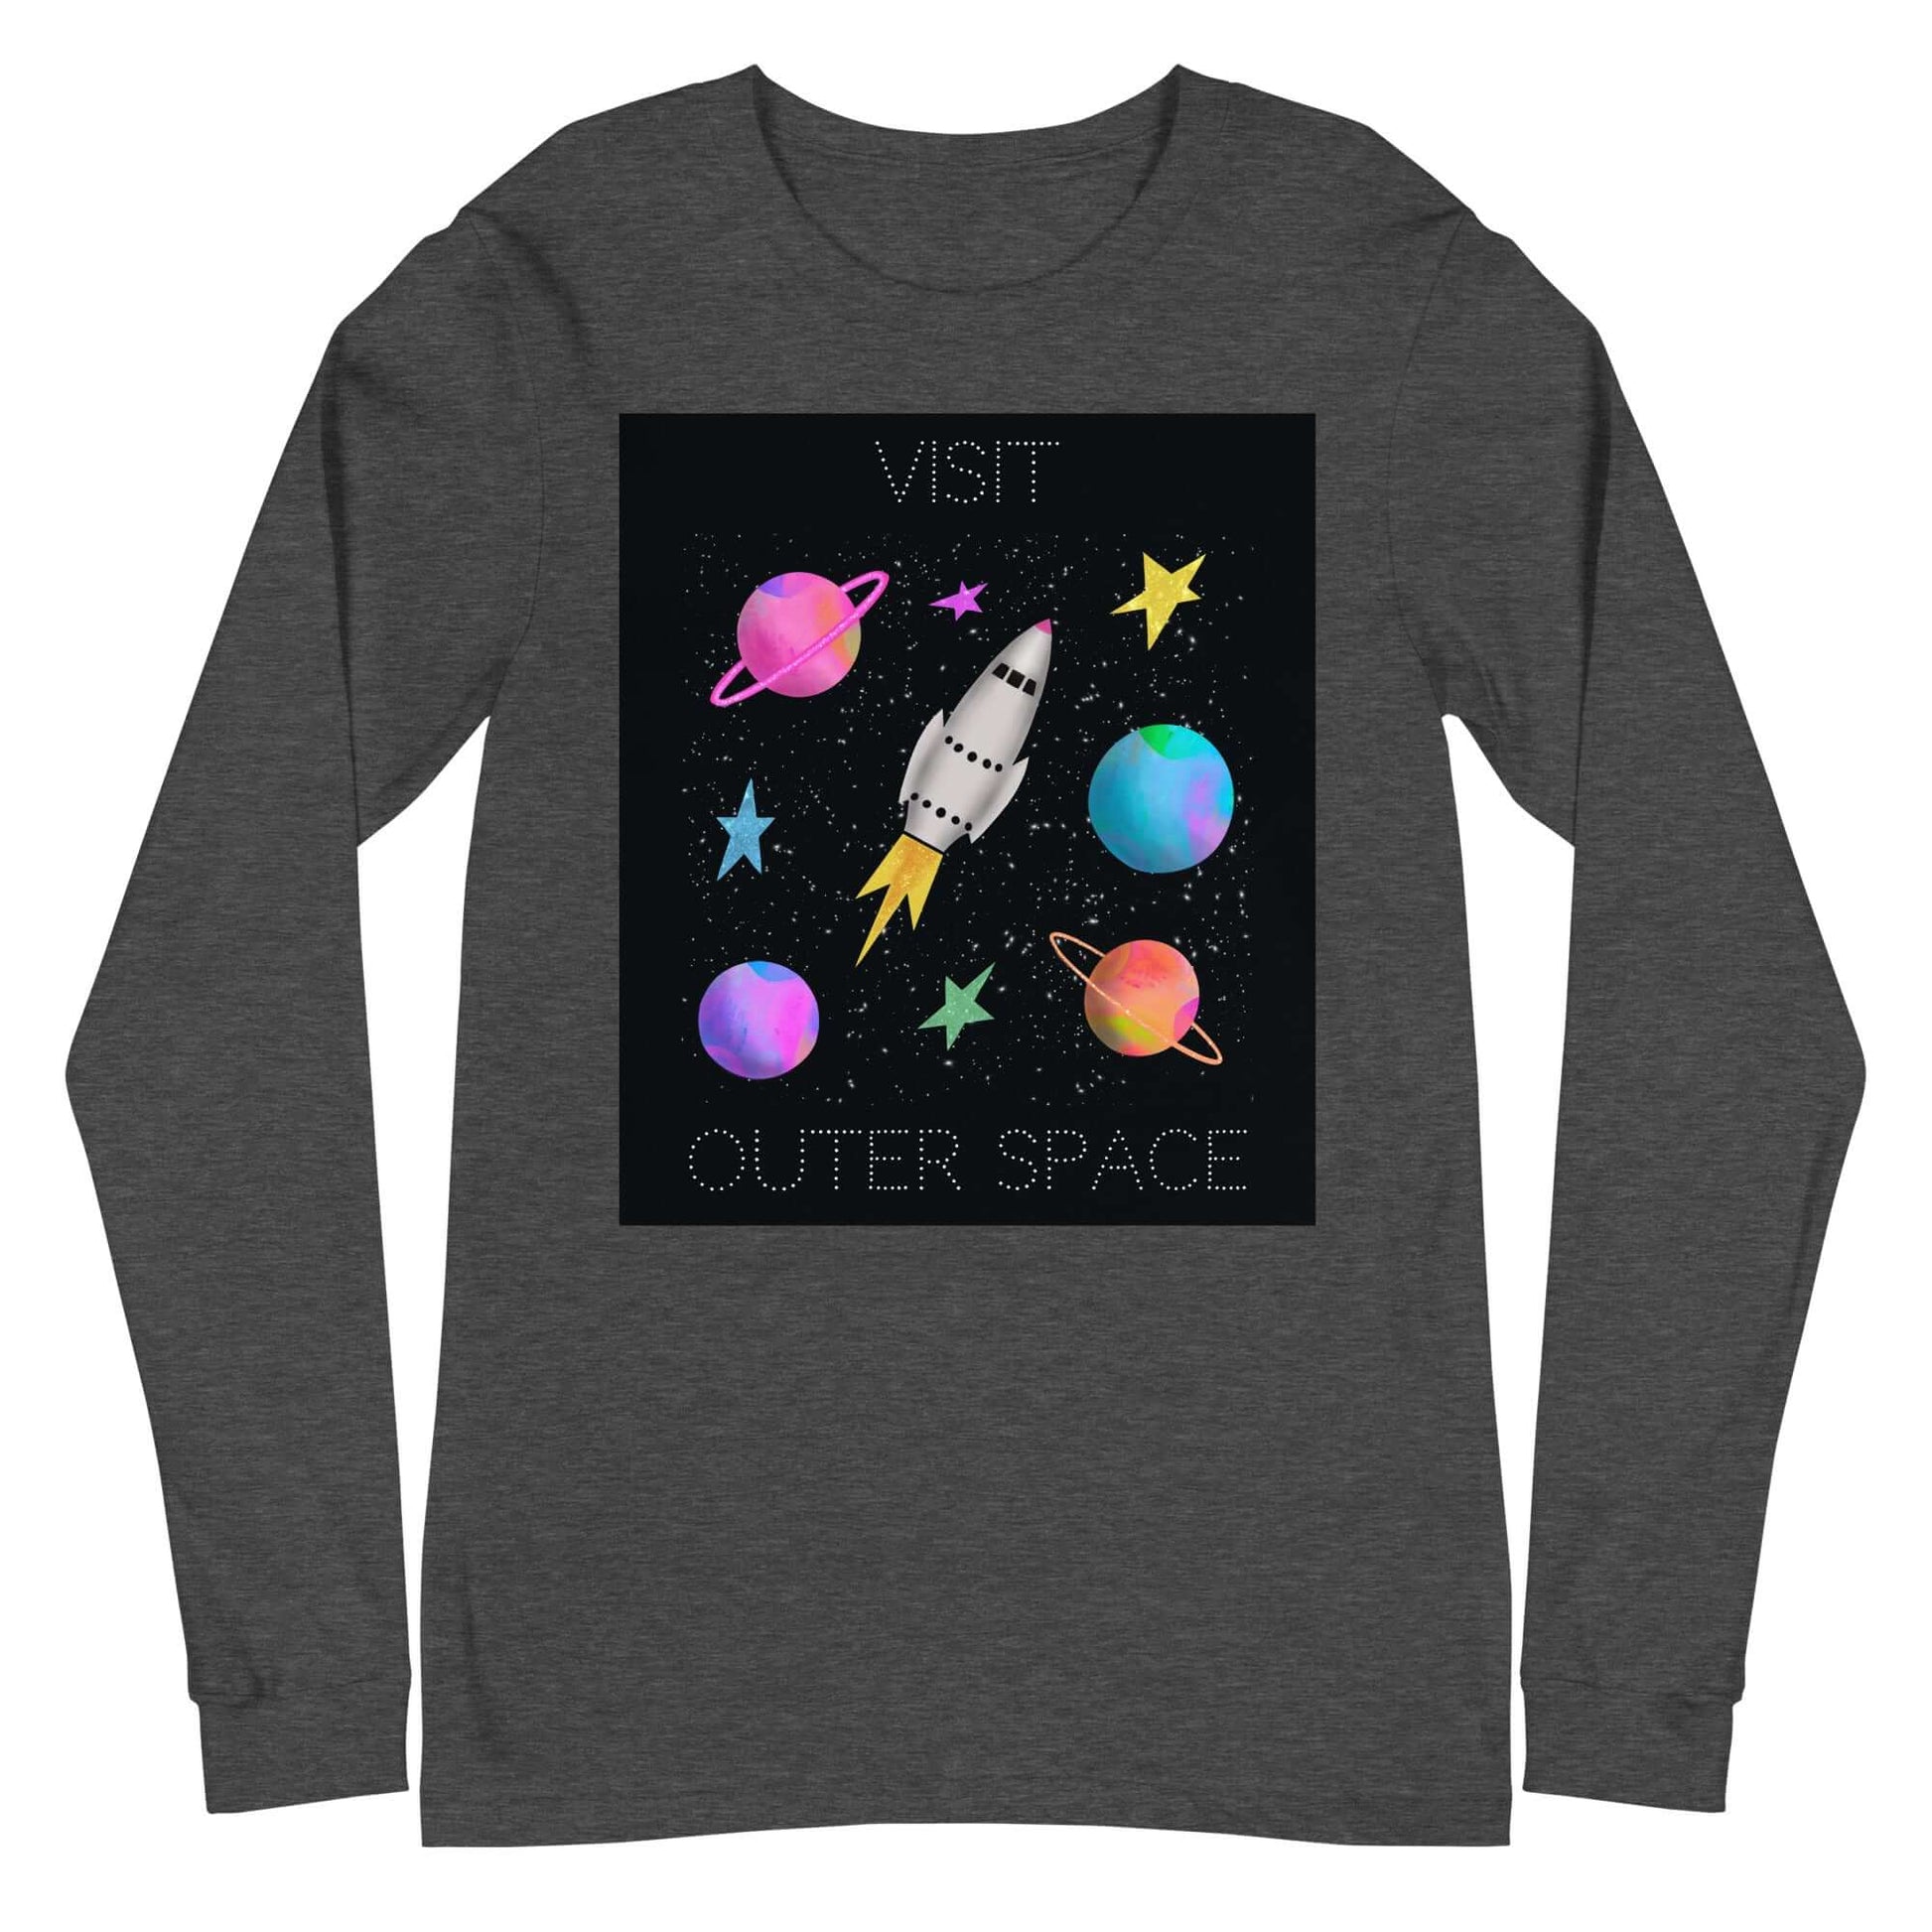 Whimsical Space Rocket with Colorful Planets and Stars on Black Background with Text “Visit Outer Space” Unisex Long Sleeve Tee in Dark Gray Heather 